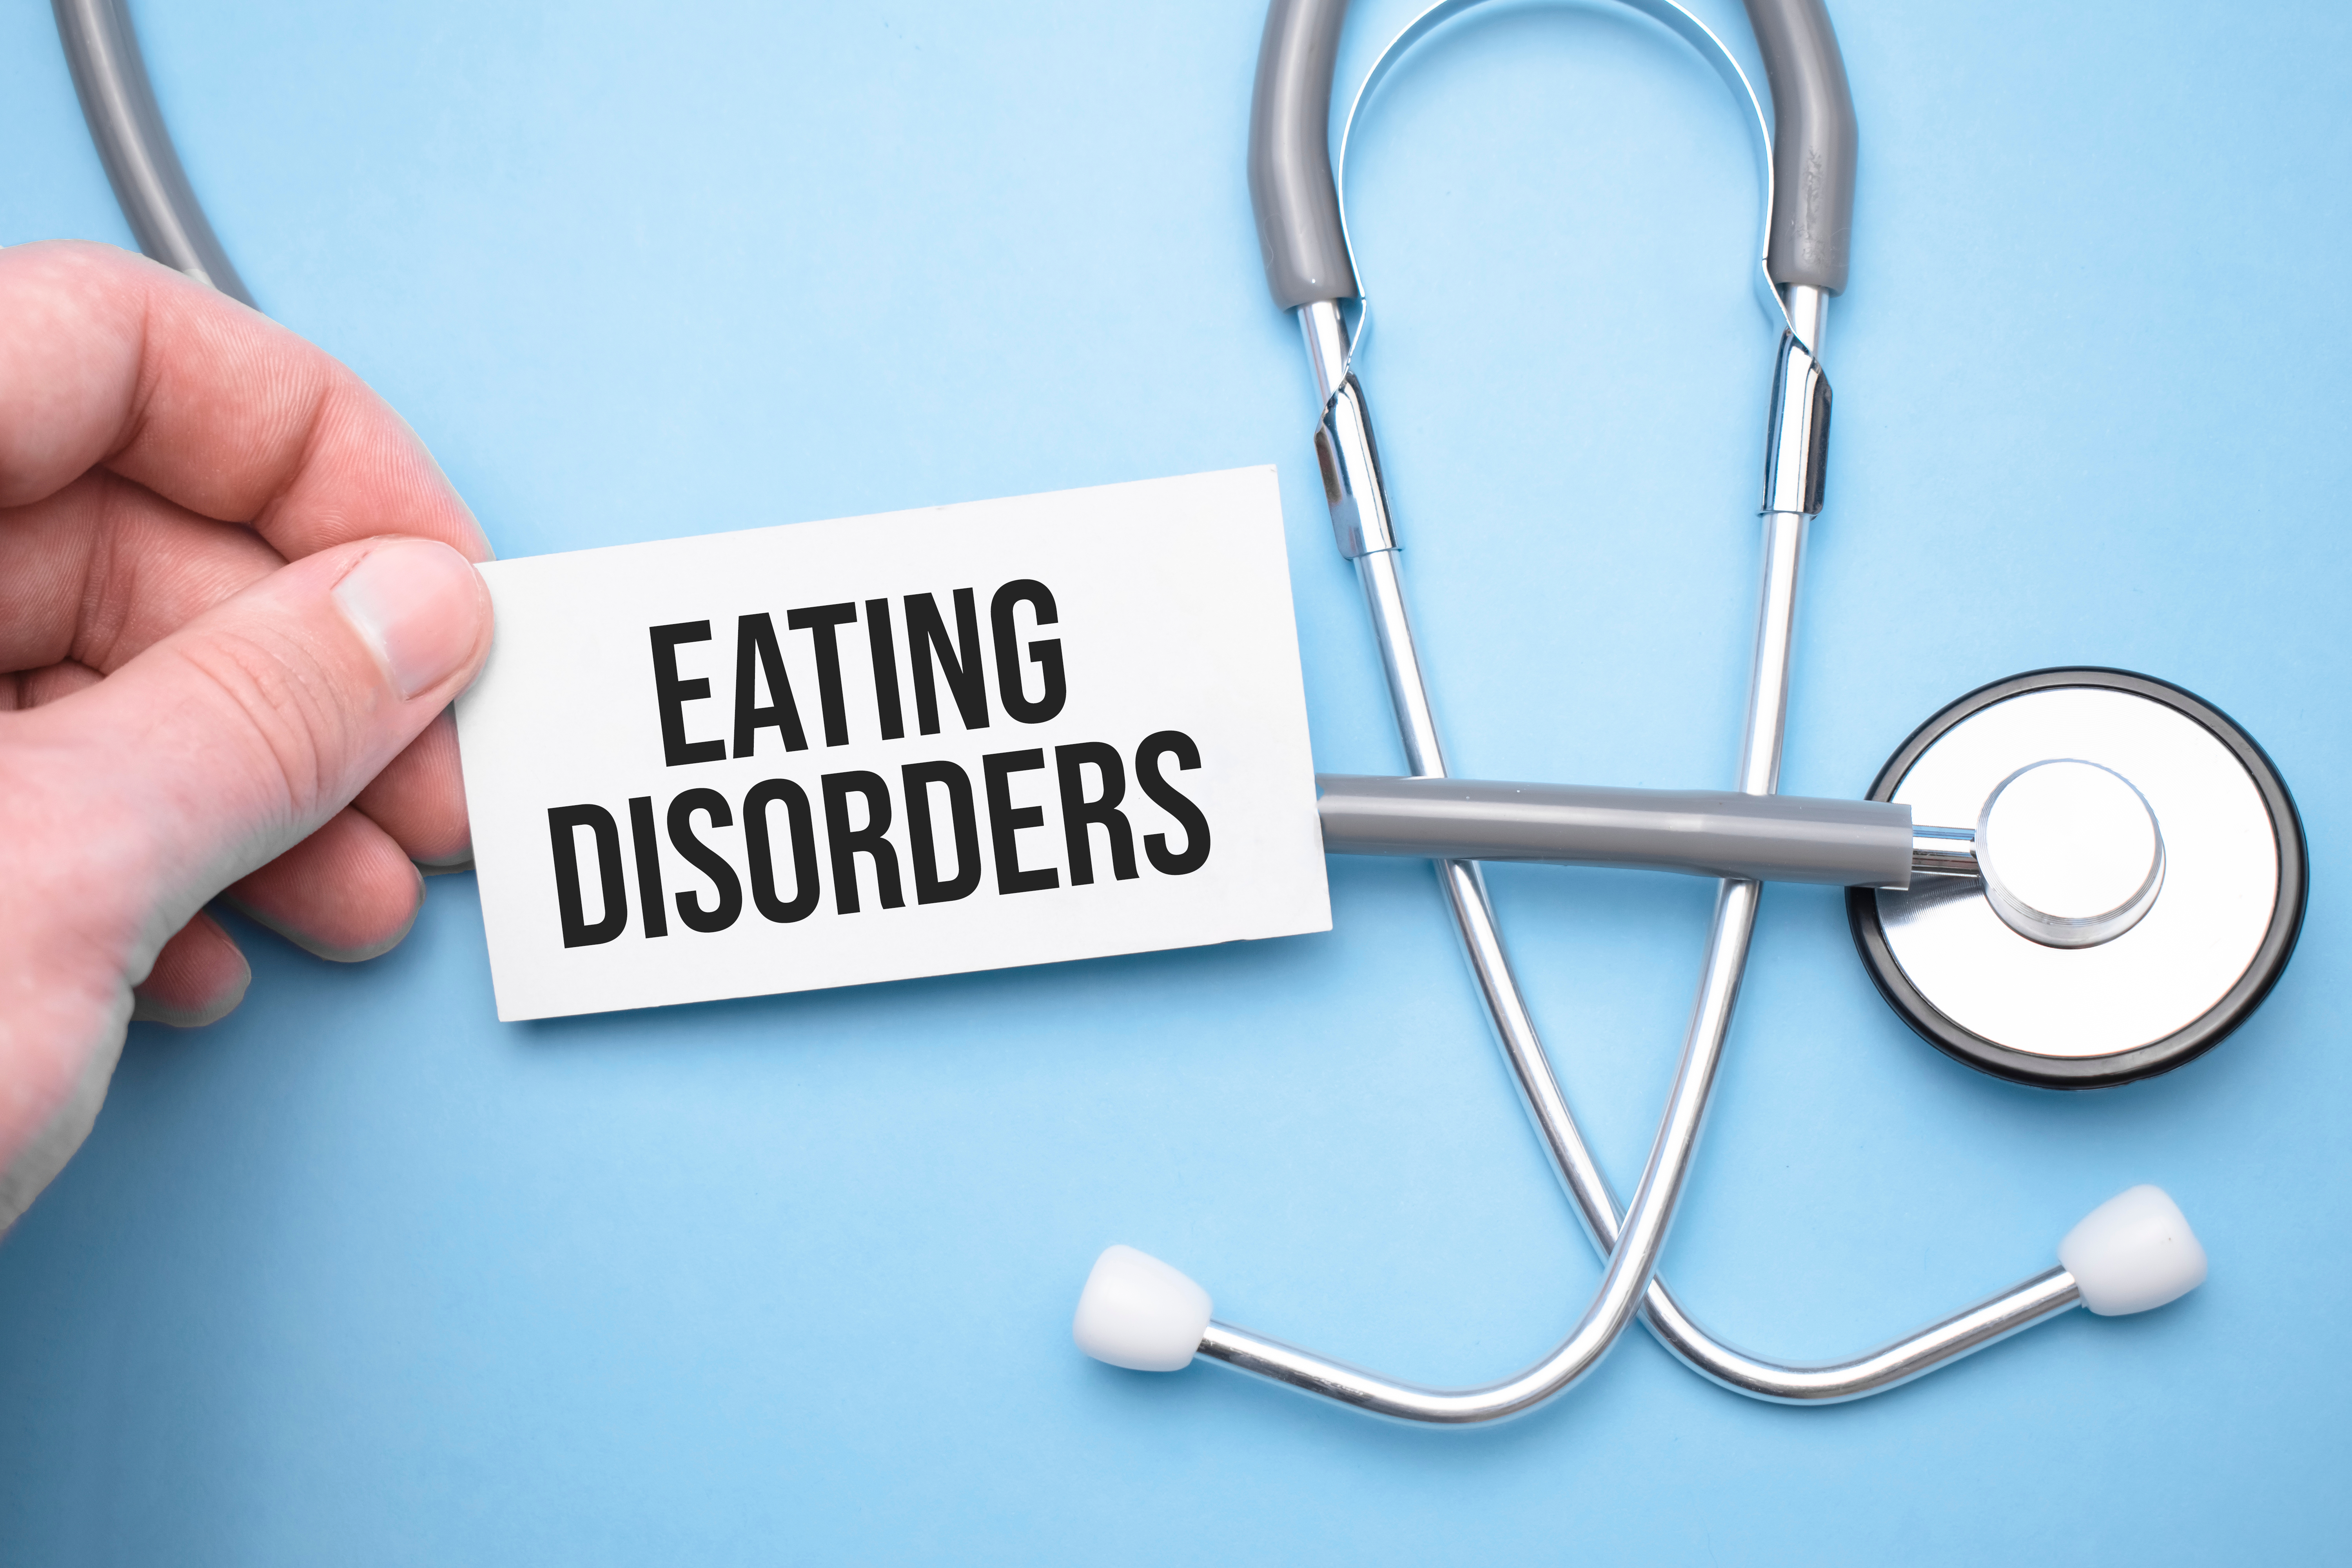 Eating disorders are a lifestyle choice